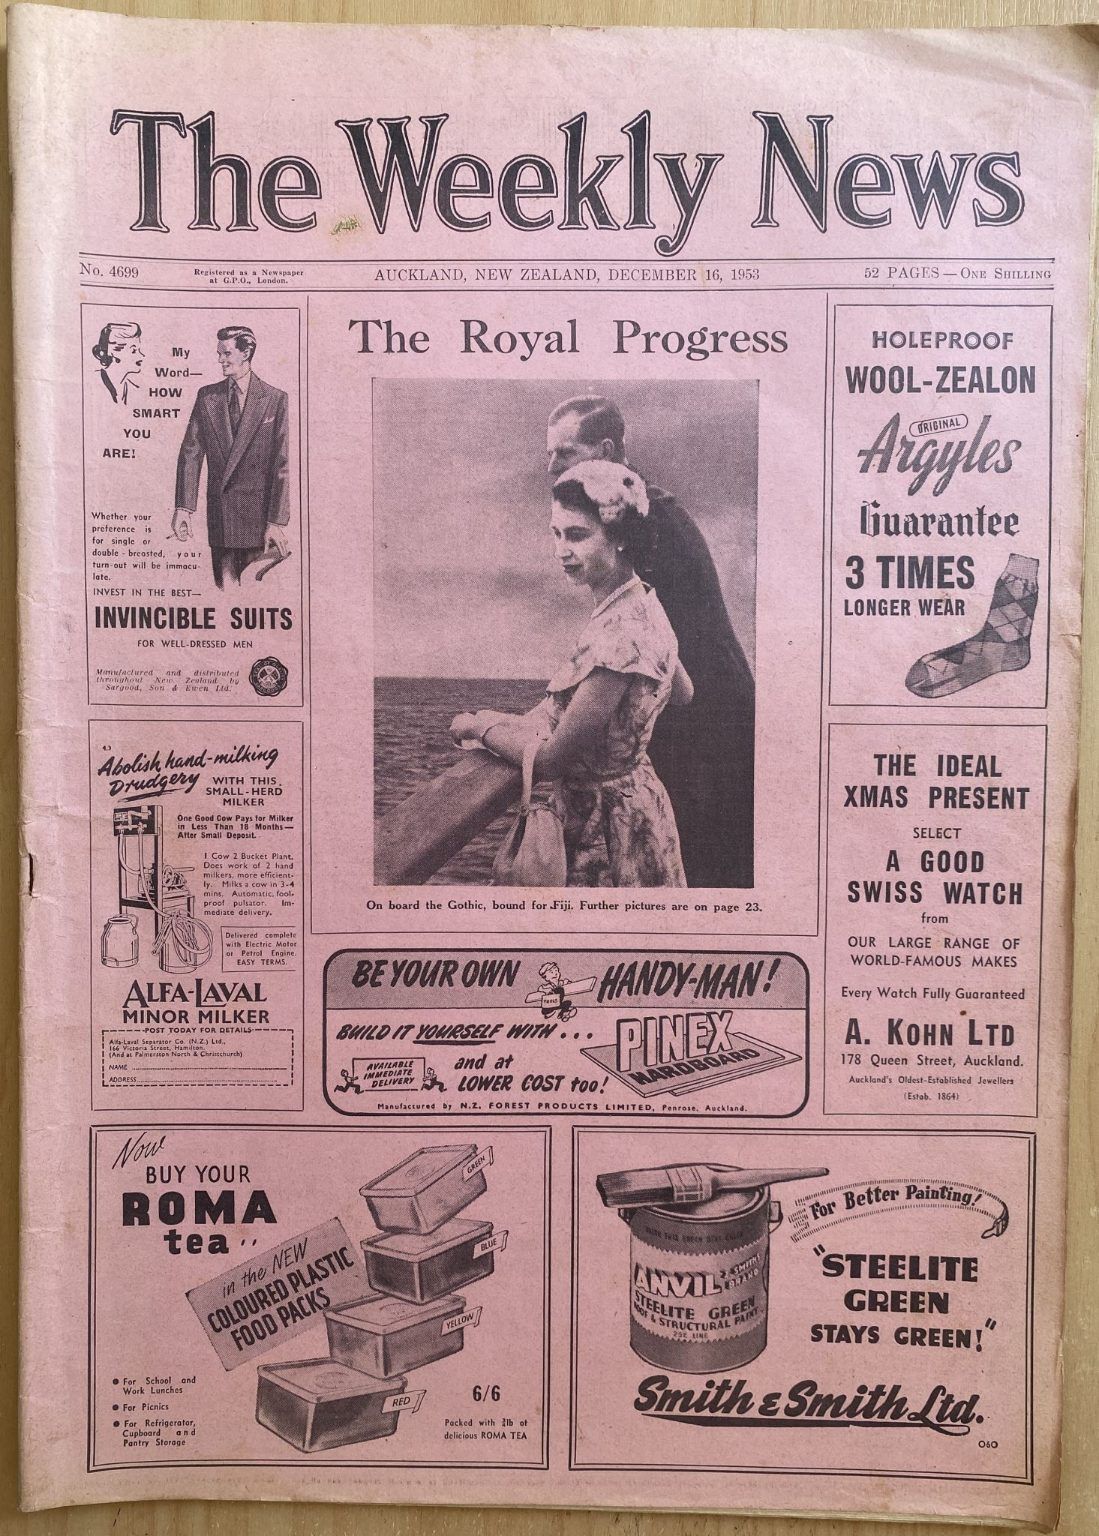 OLD NEWSPAPER: The Weekly News - No. 4699, 16 December 1953